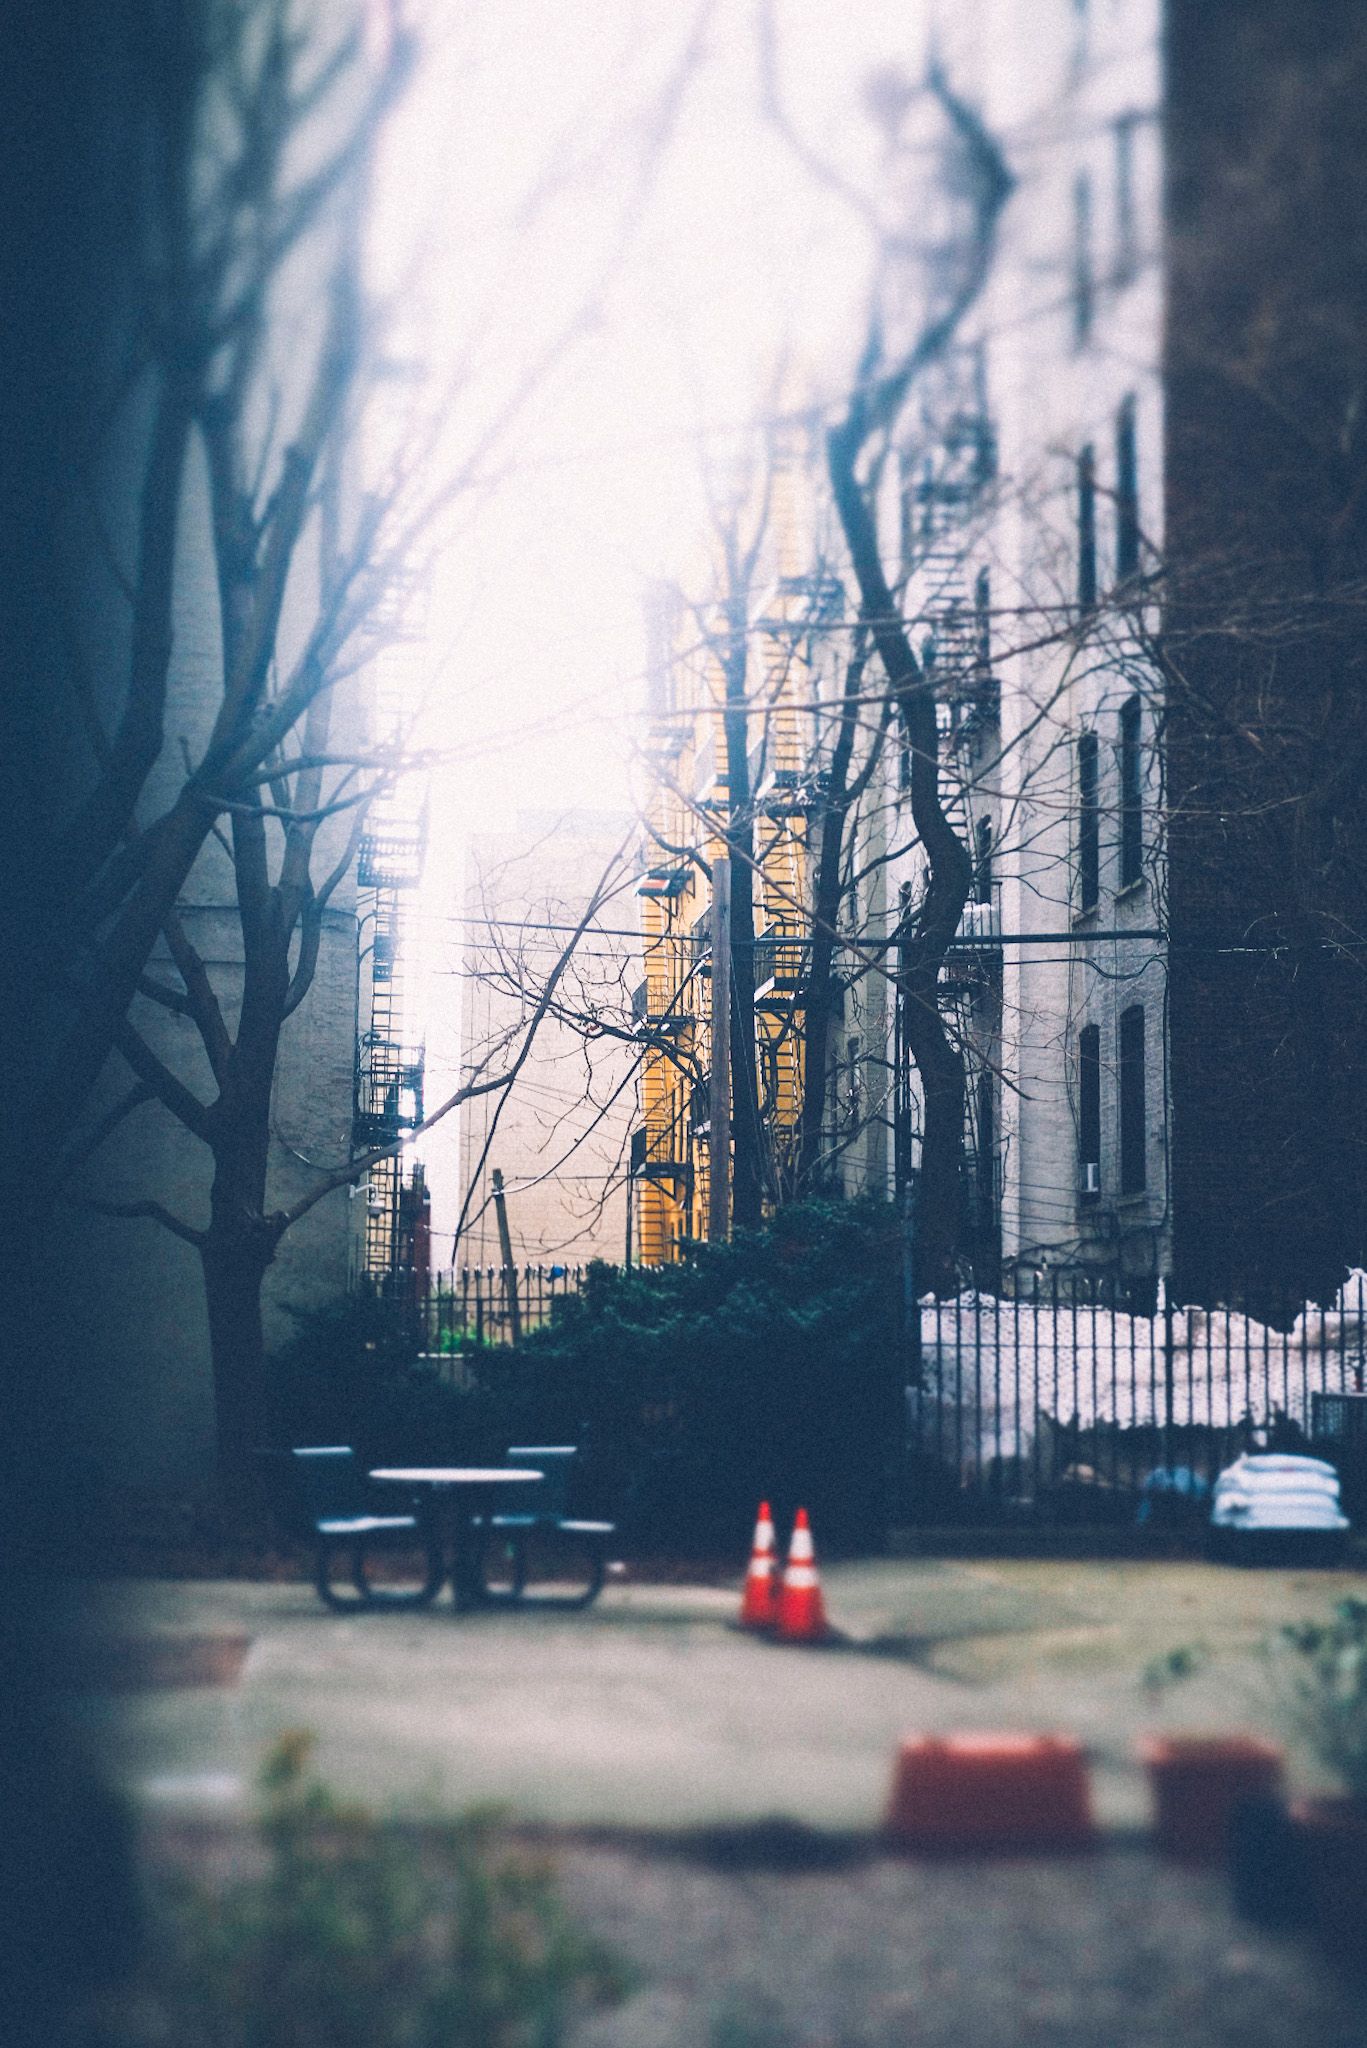 A view of a courtyard, tight depth of field, on a cloudy day. A few orange traffic cones stand in the middle.